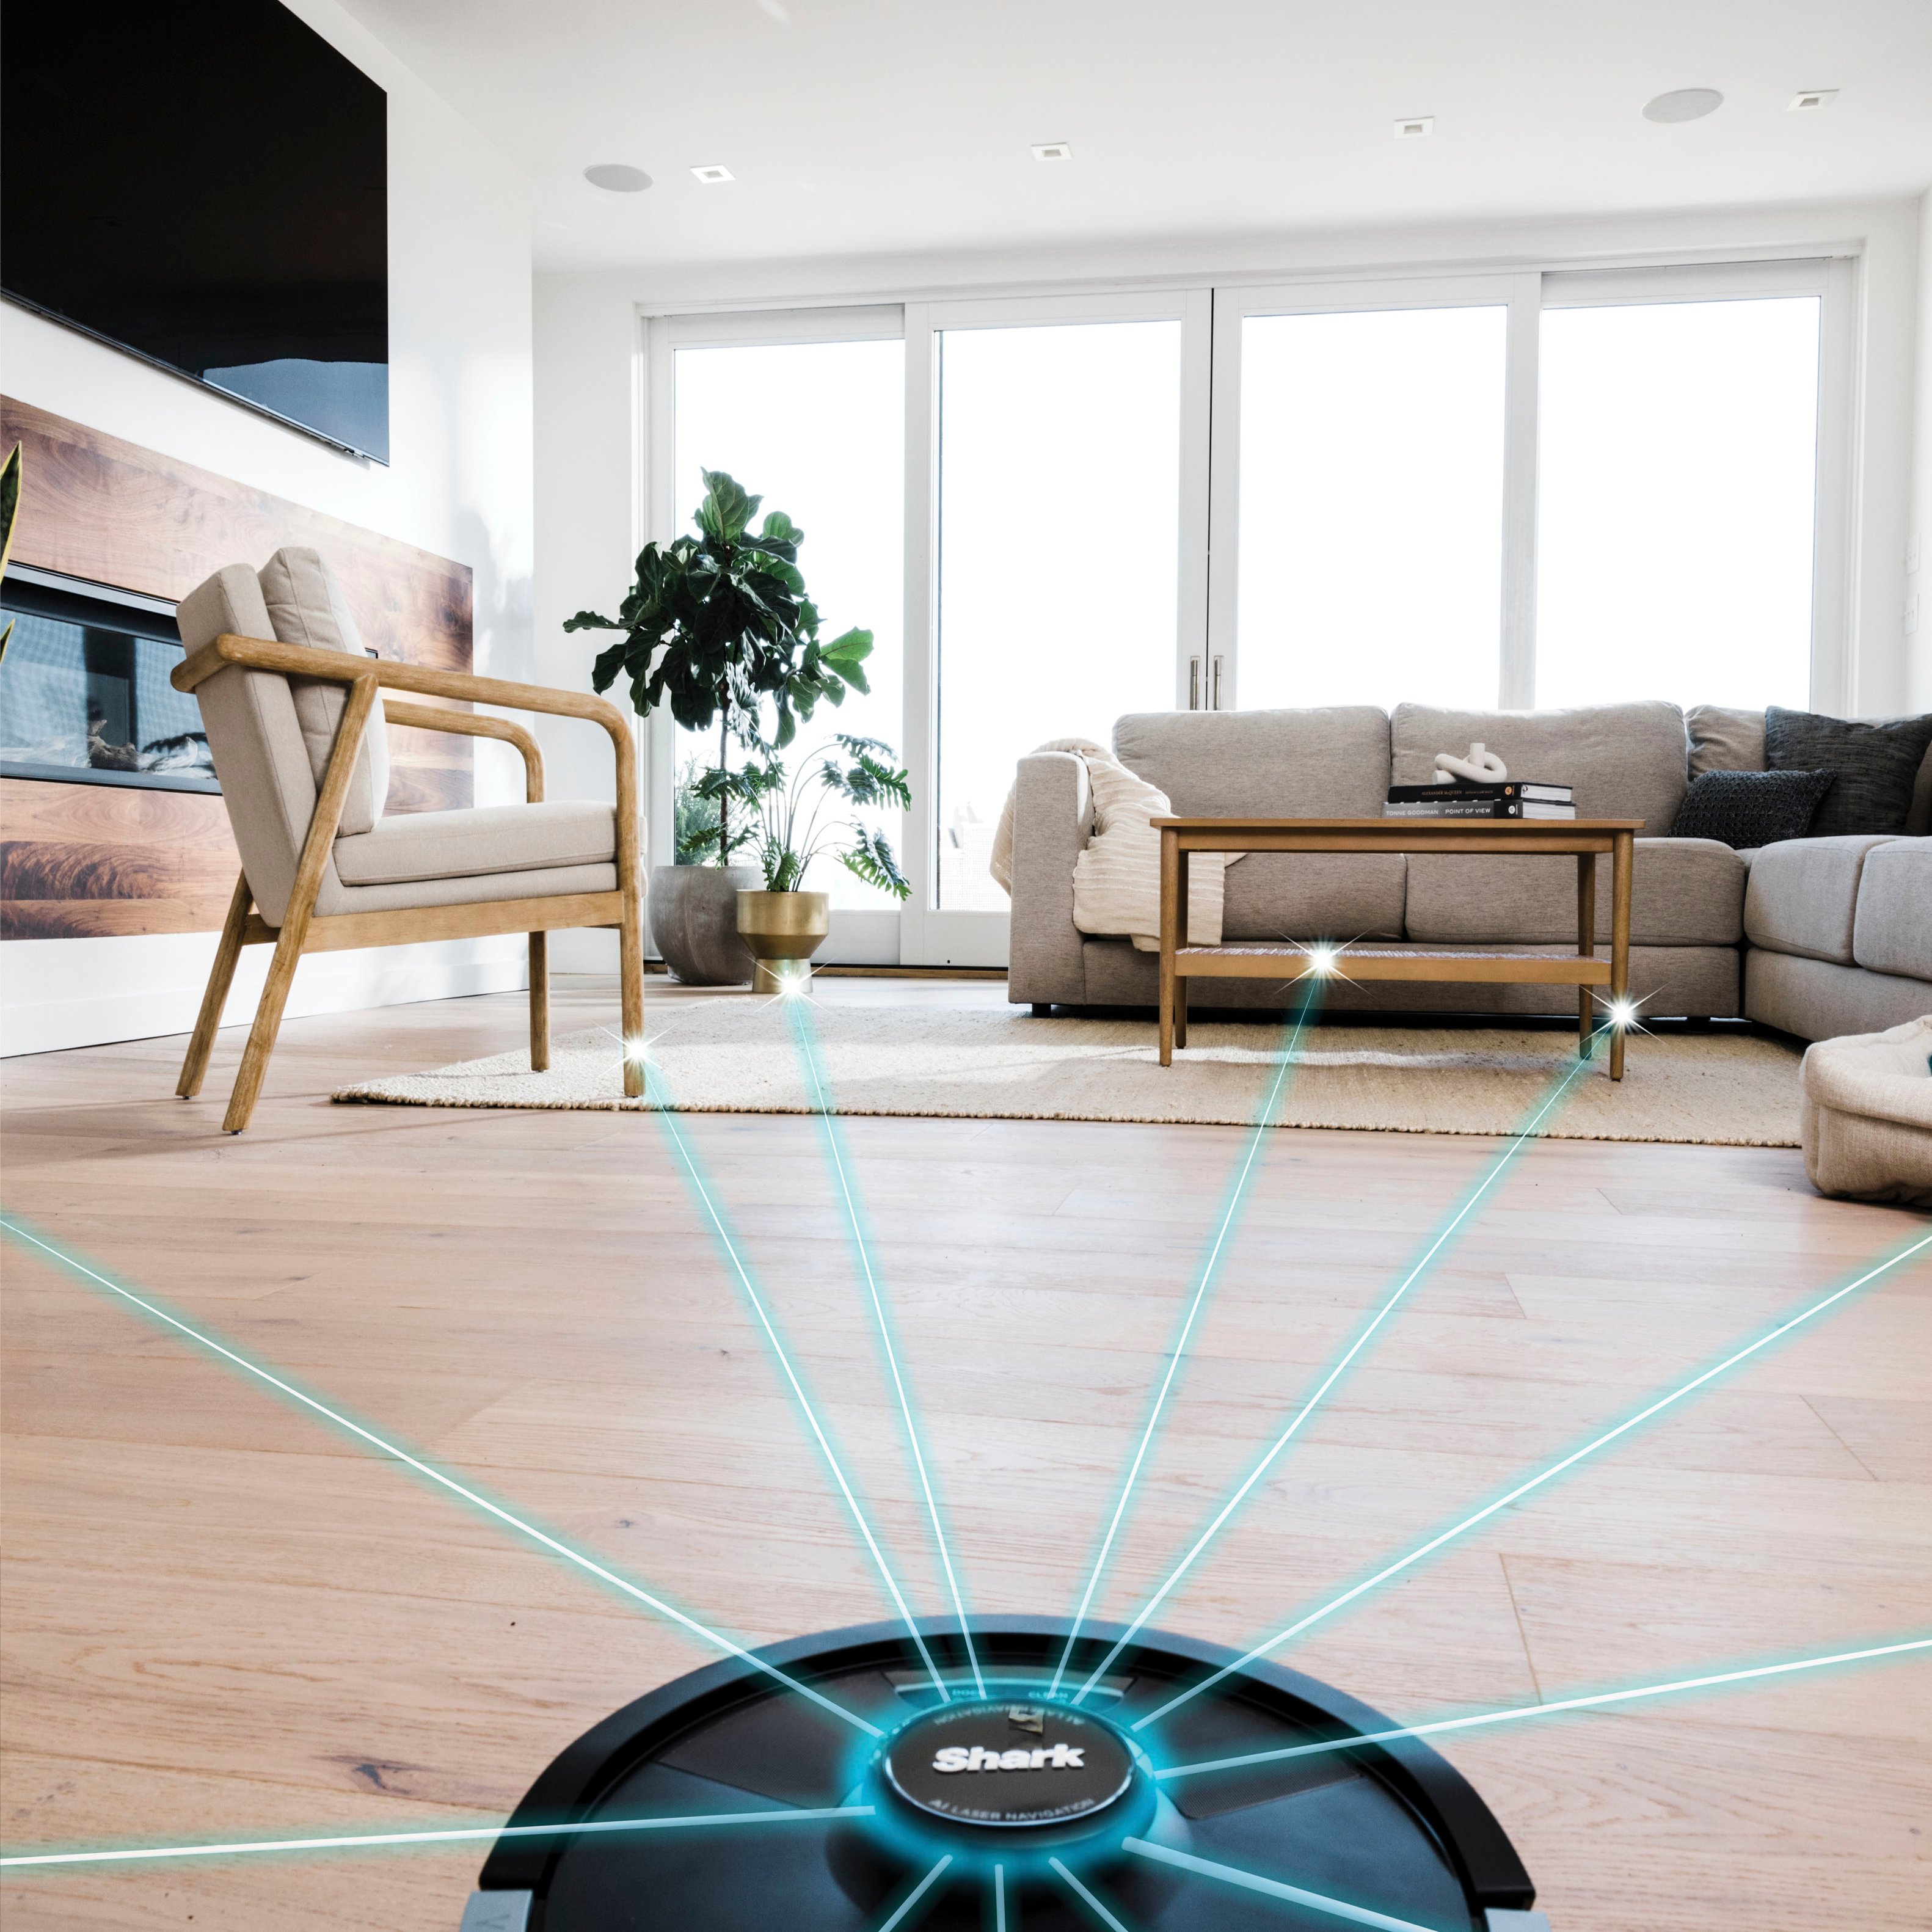 WiFi & Sonic Shark Connected Mapping, with 2-in-1 RV2620WD - Best Vacuum Buy Ultra Clean, Mopping, Matrix AI Black Home Robot Mop